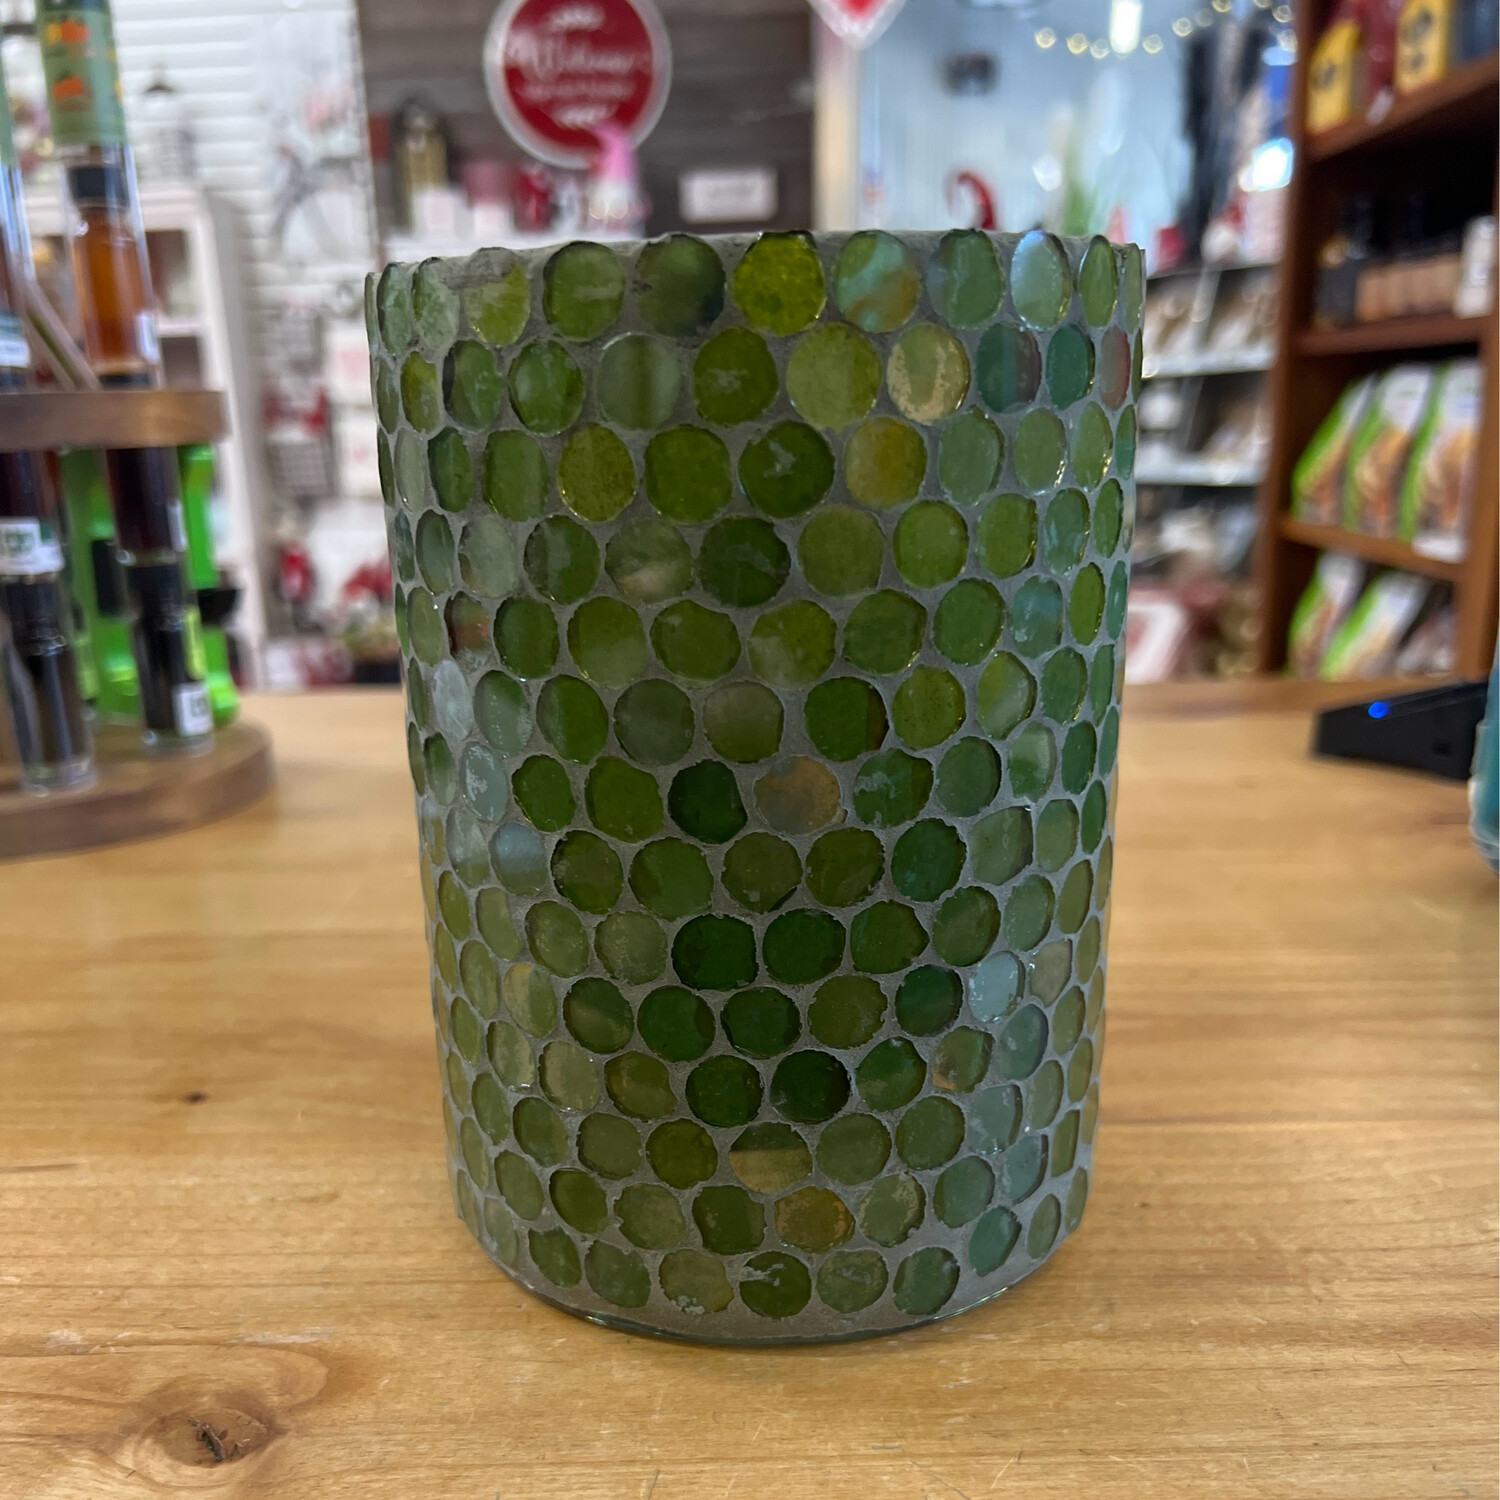 6-3/4" Recycled Mosaic Glass Votive